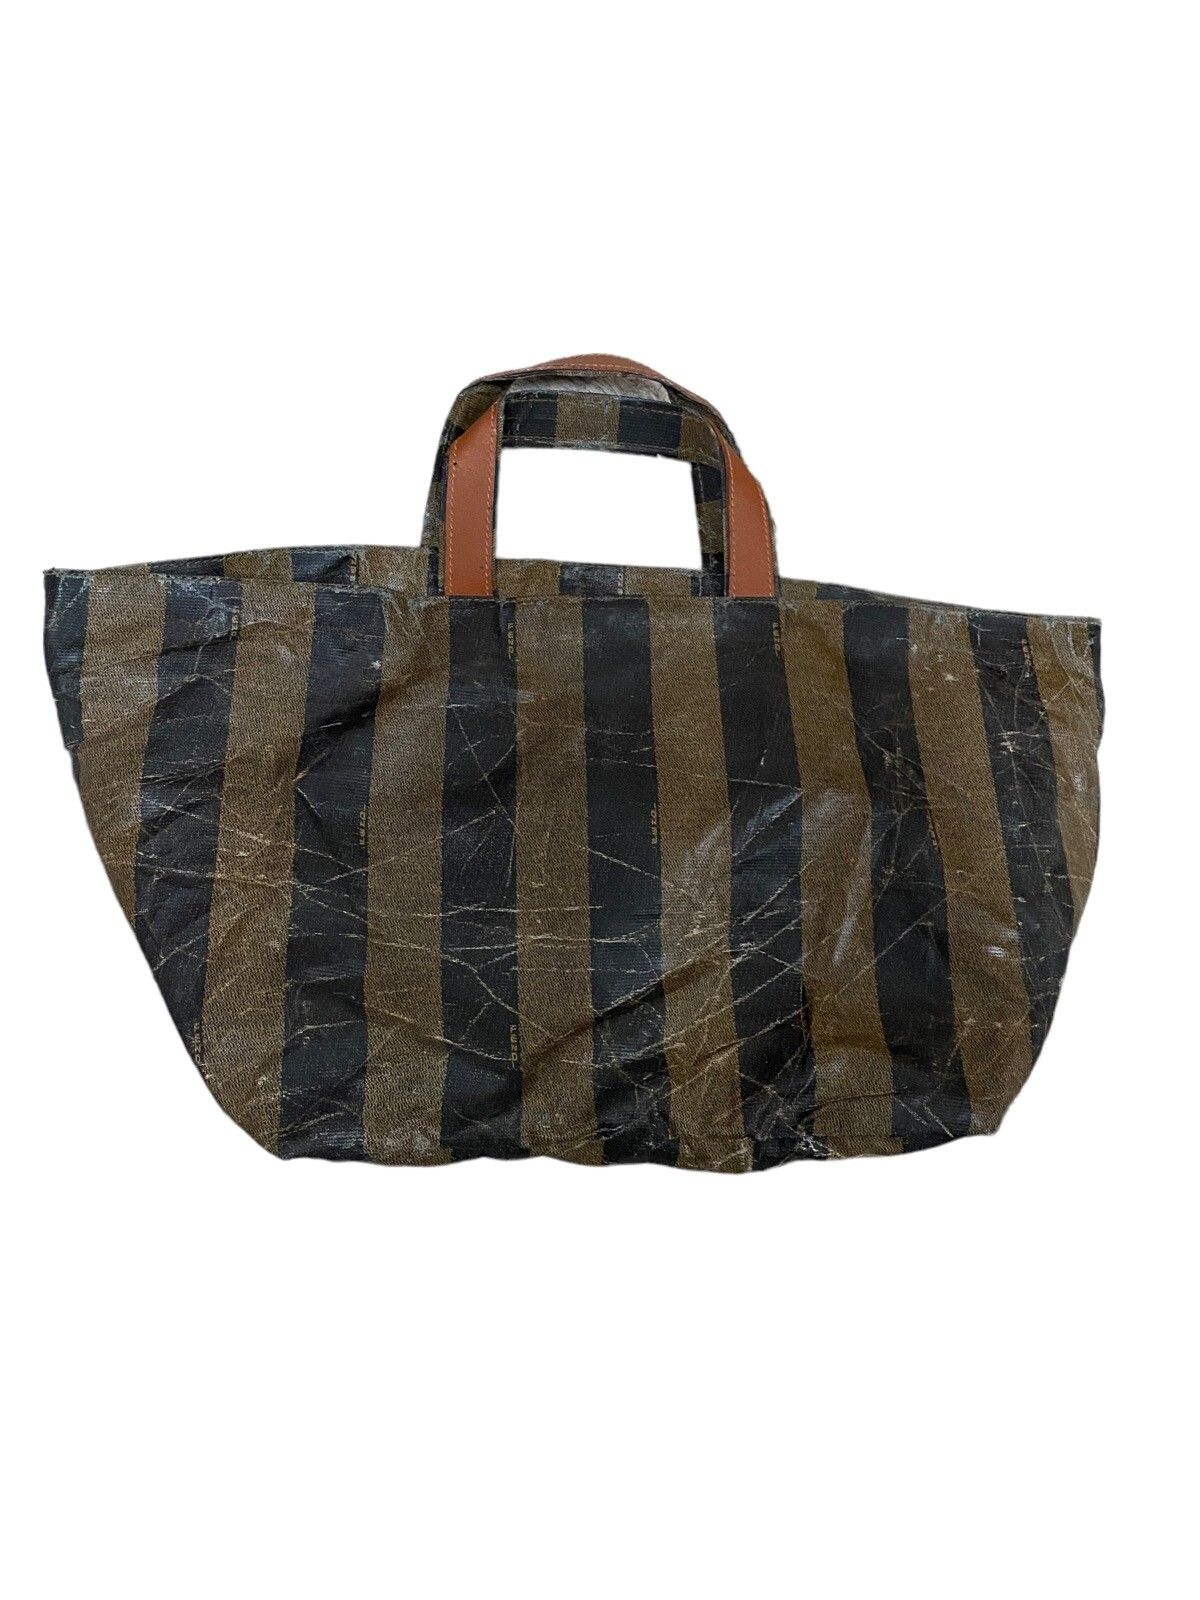 Fendi Roma Pequin Striped Tote Bag Made In Italy - 2